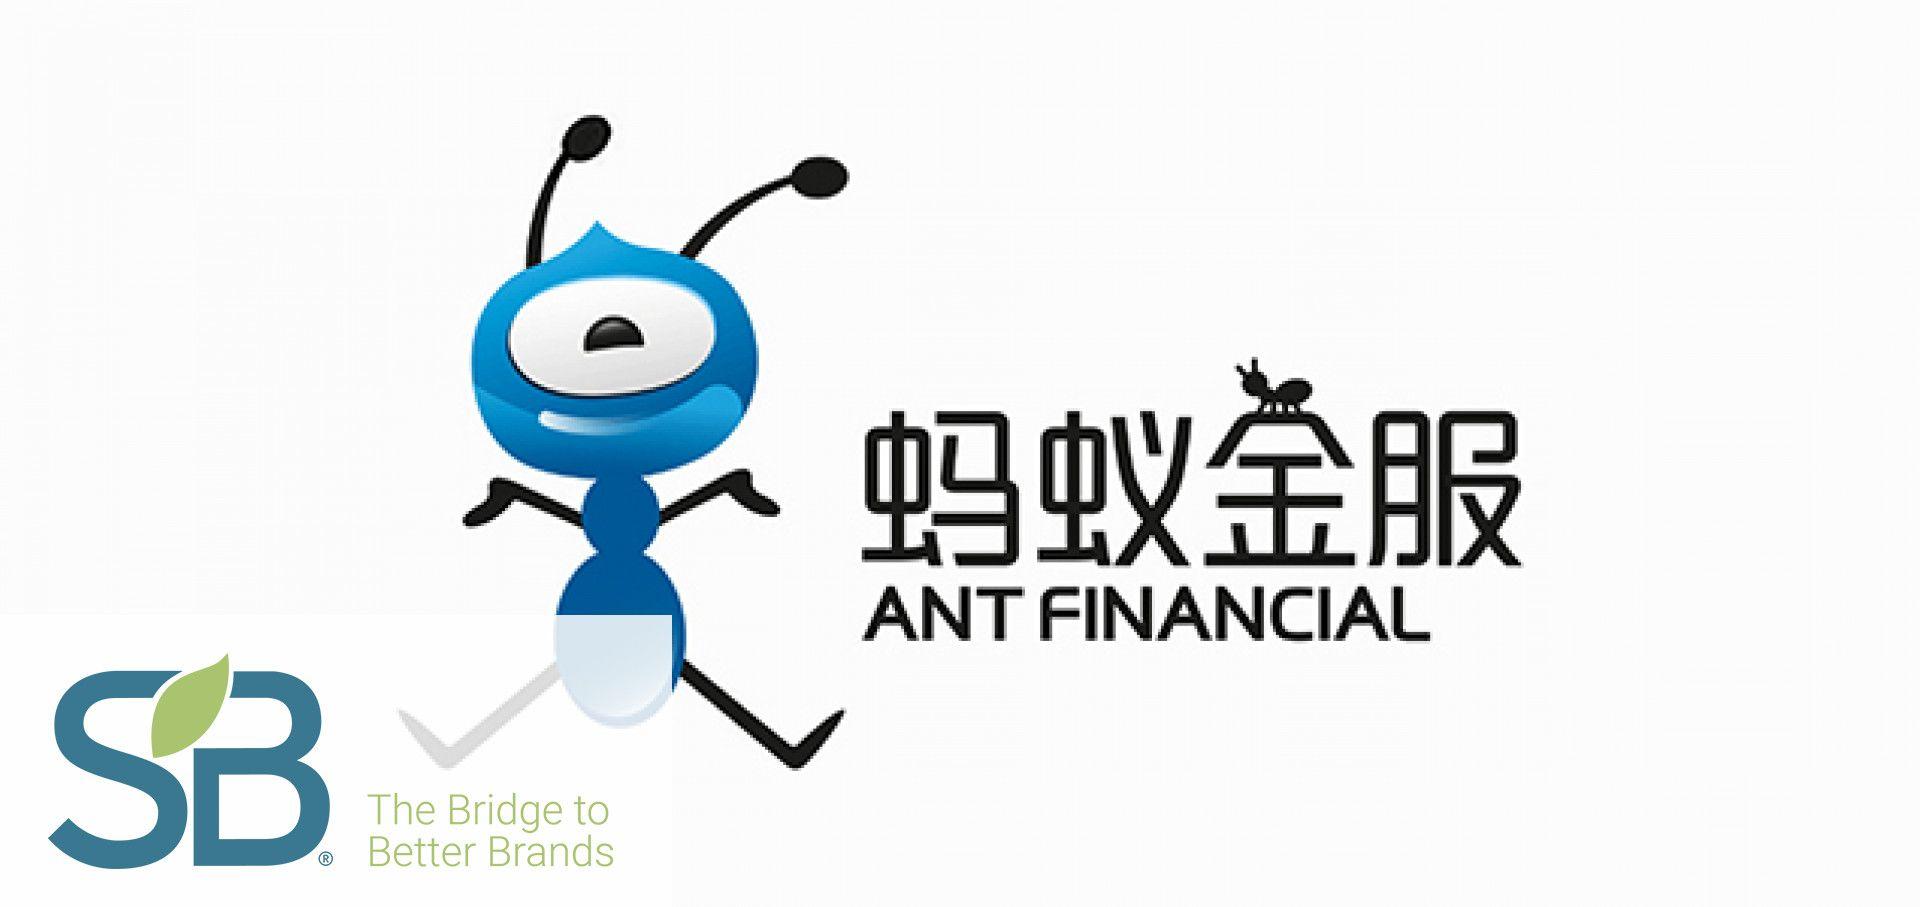 Ant Financial Logo - Ant Financial Harnesses Blockchain Technology to Finance Solutions